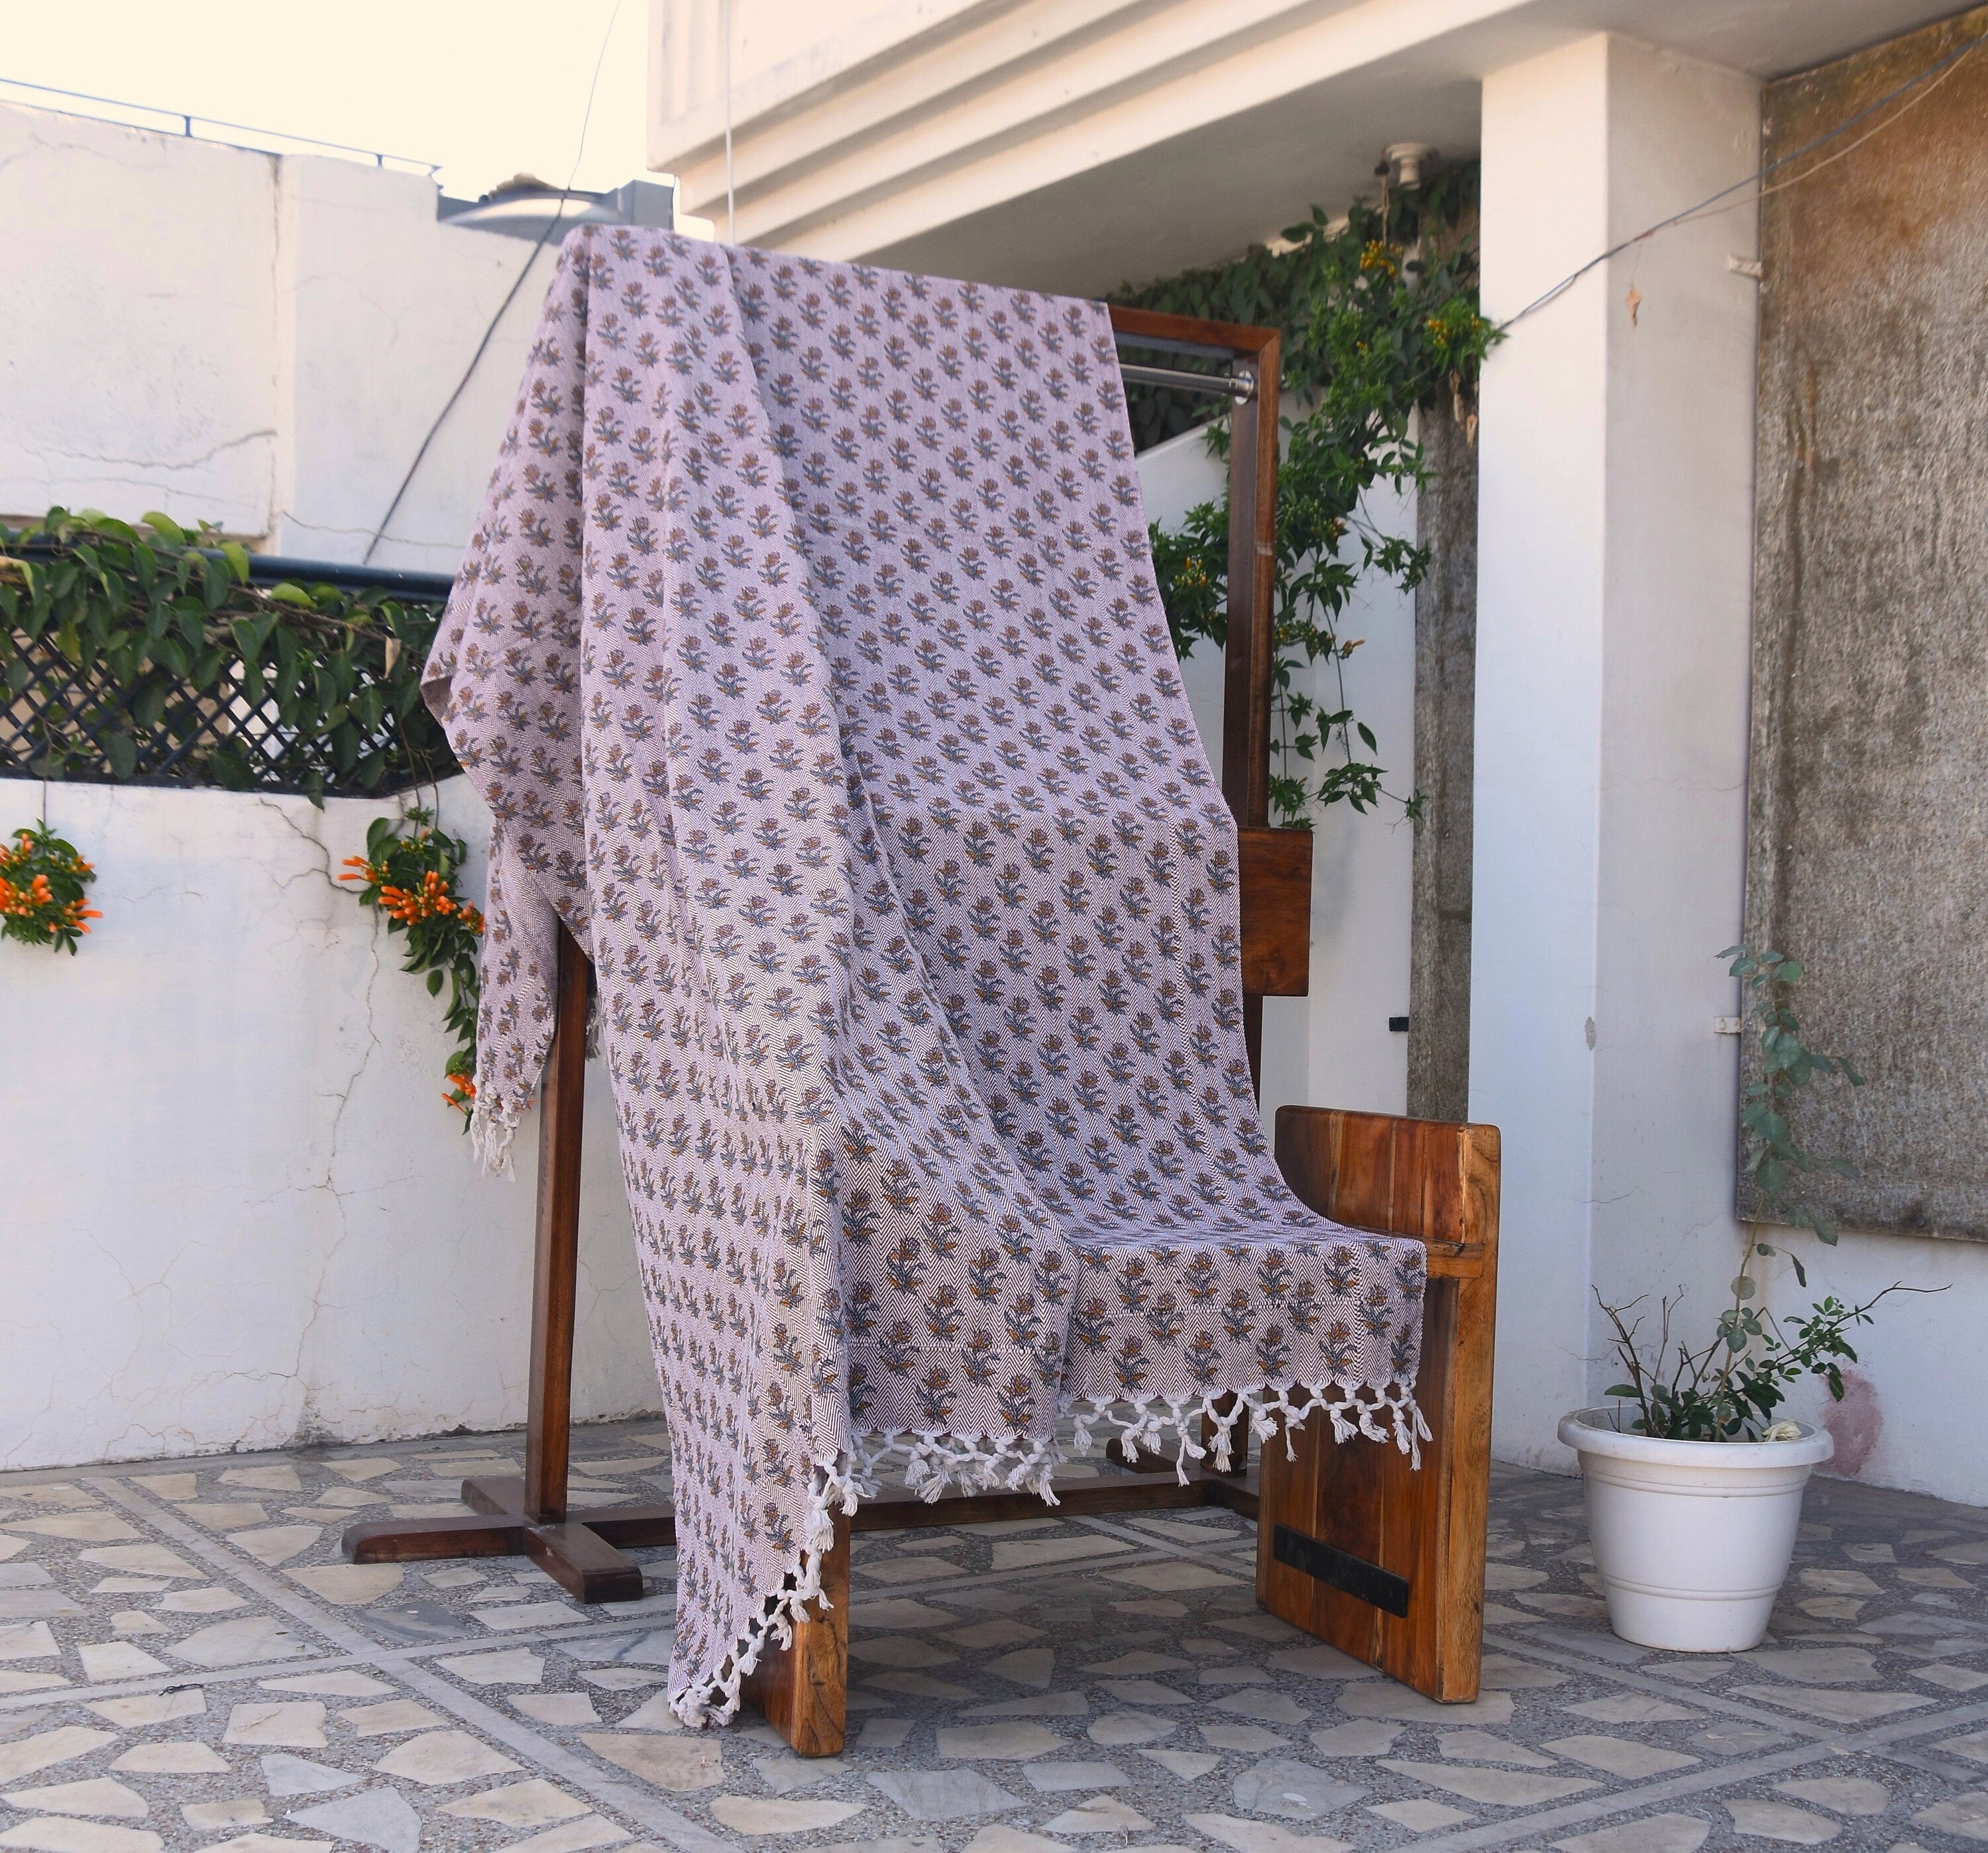 Blankets and Throws, Handwoven Block Print Throws - Handmade Blankets - Handwoven Handloom Fabric - COASTAL TULIP